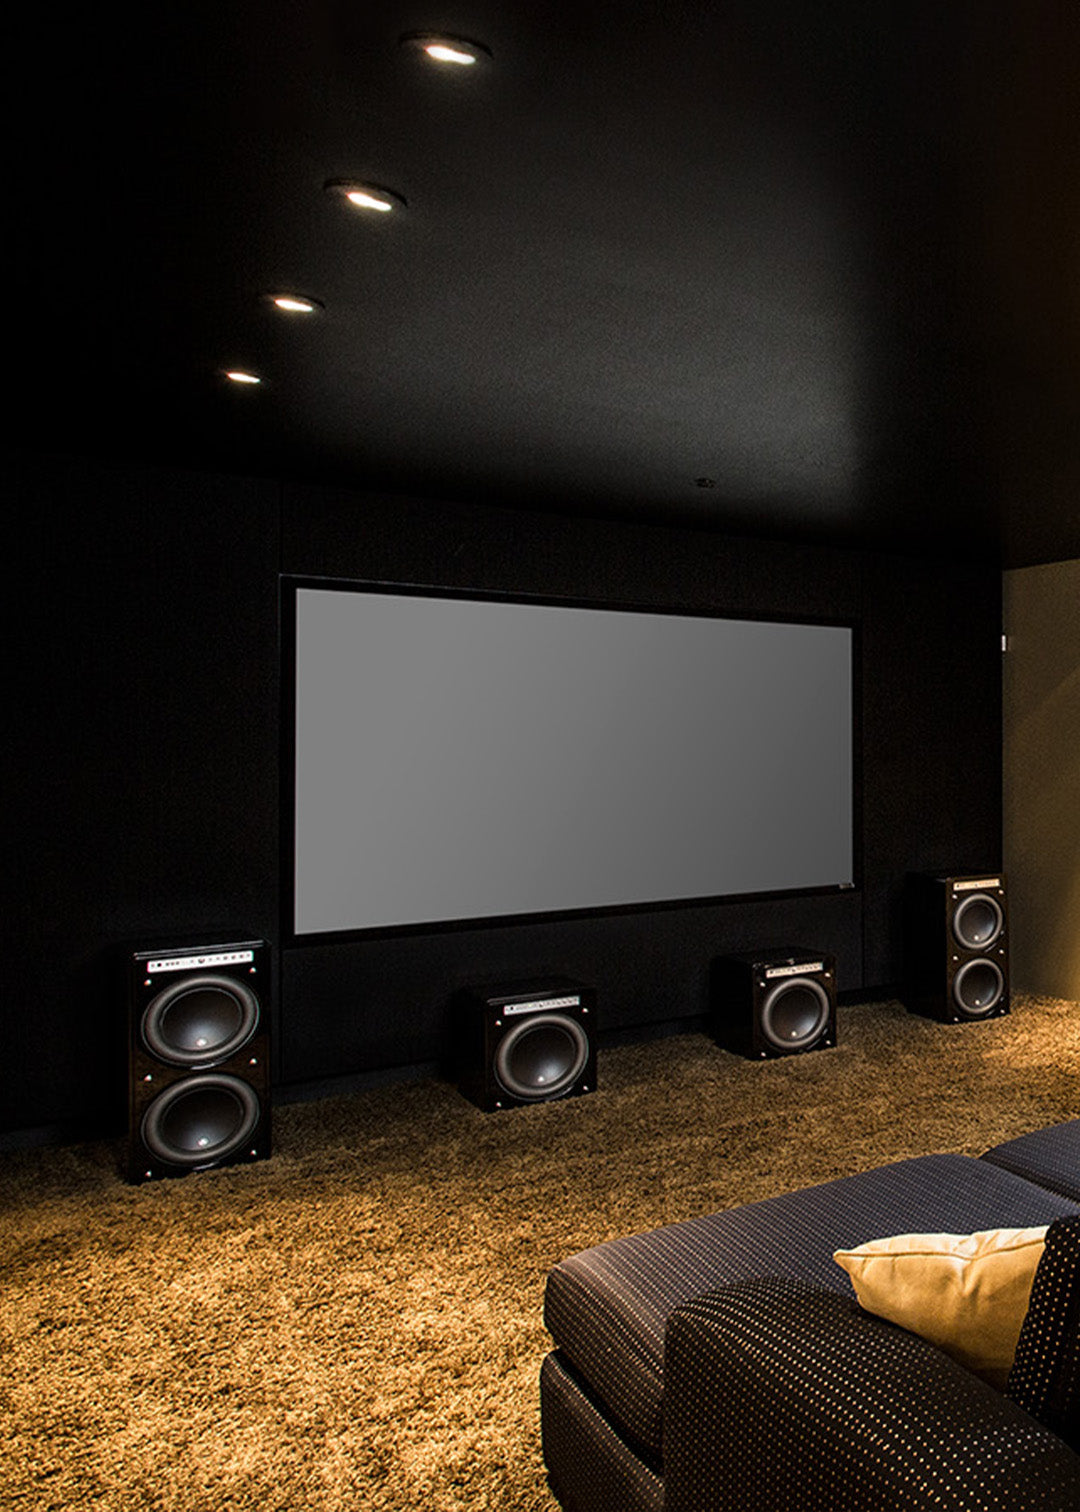 Four Fathom v2 subwoofer placed properly in home theatre for smoothness, power, and consistency.